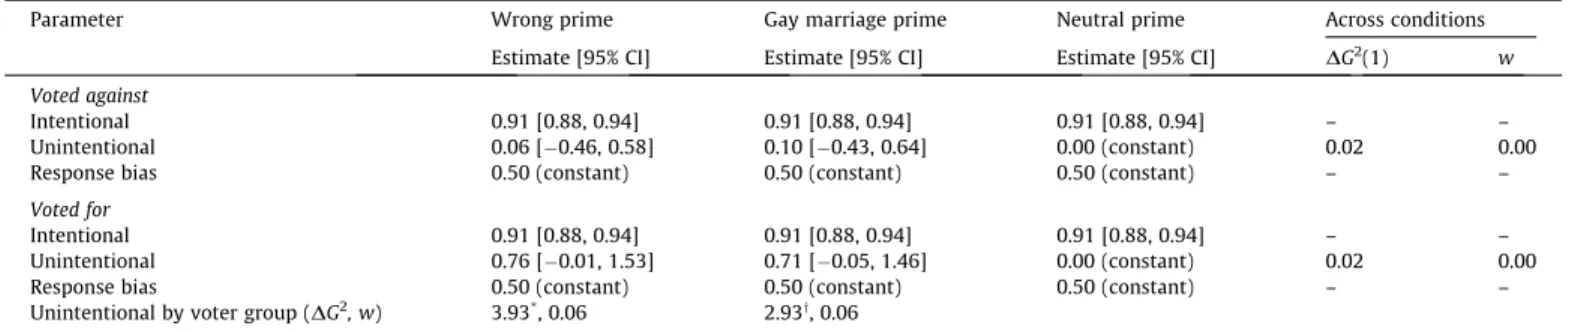 Table 11 displays correlations between parameter estimates and moral personality variables